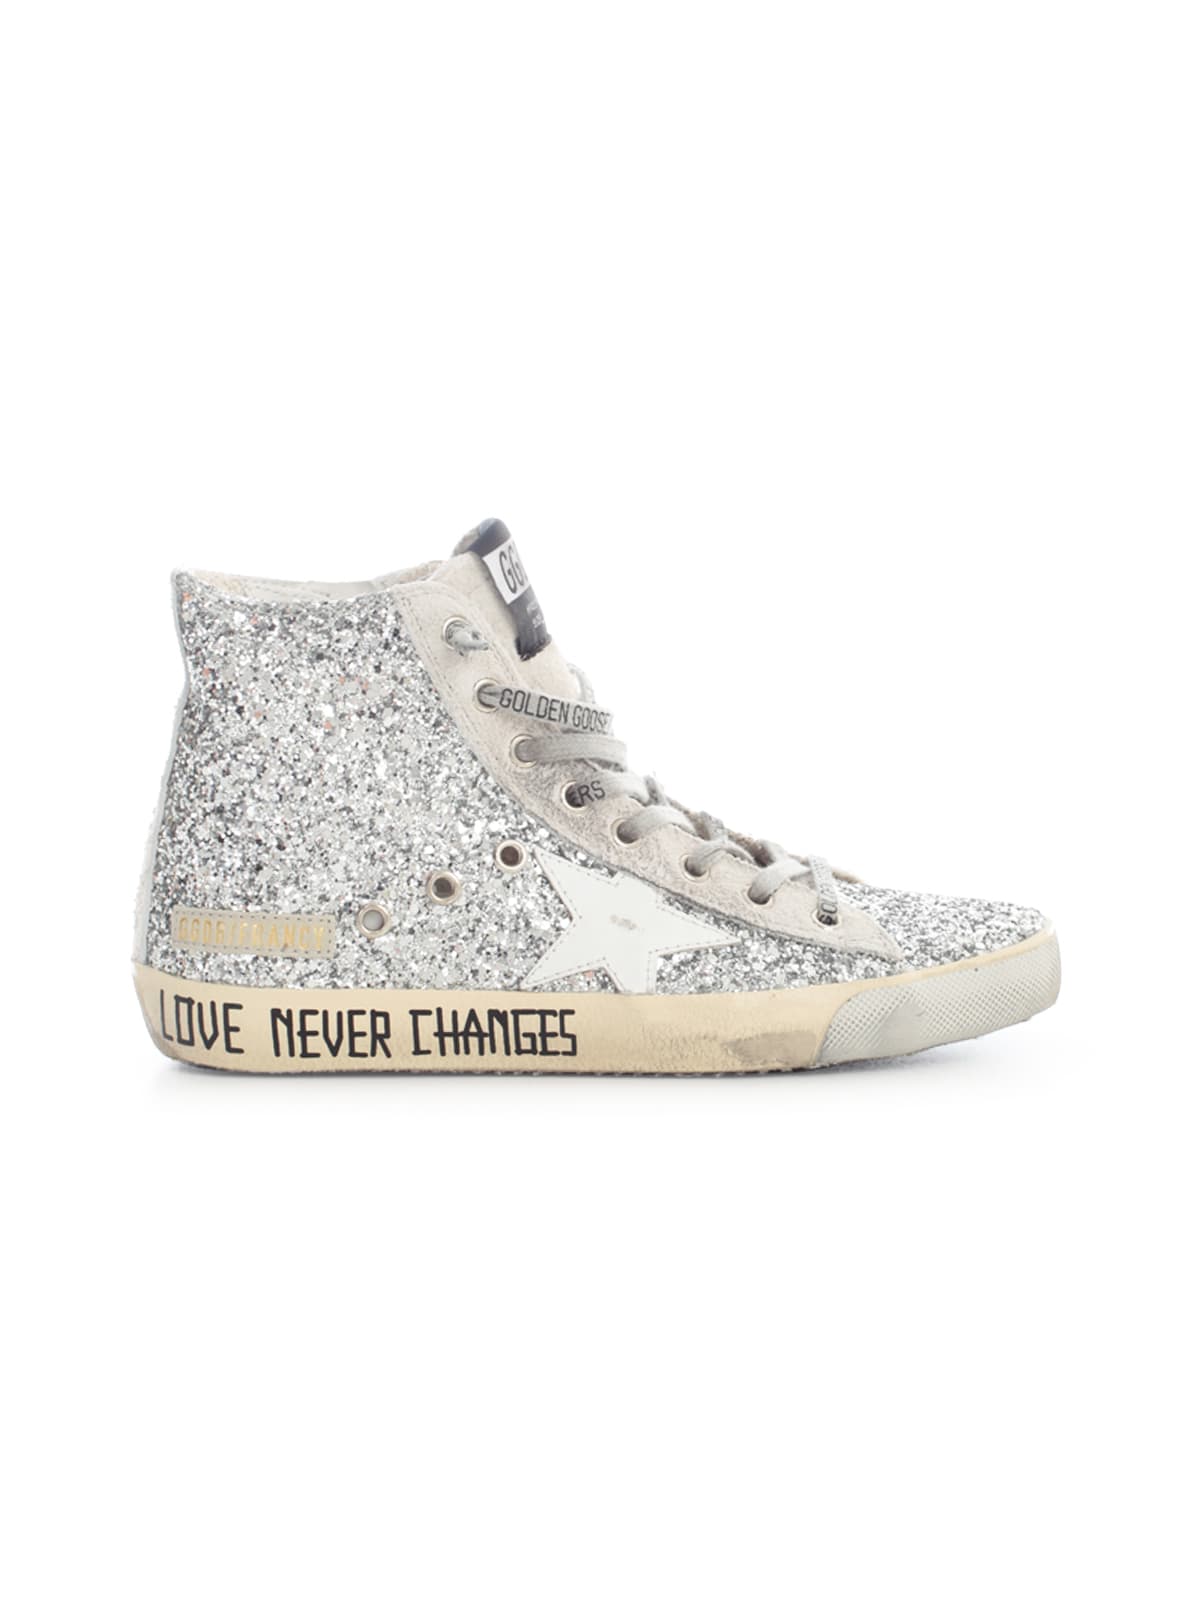 Golden Goose Francy Glitter And Long Hair Suede Upper Leather Star Long Hair Suede Heel Signature Foxing